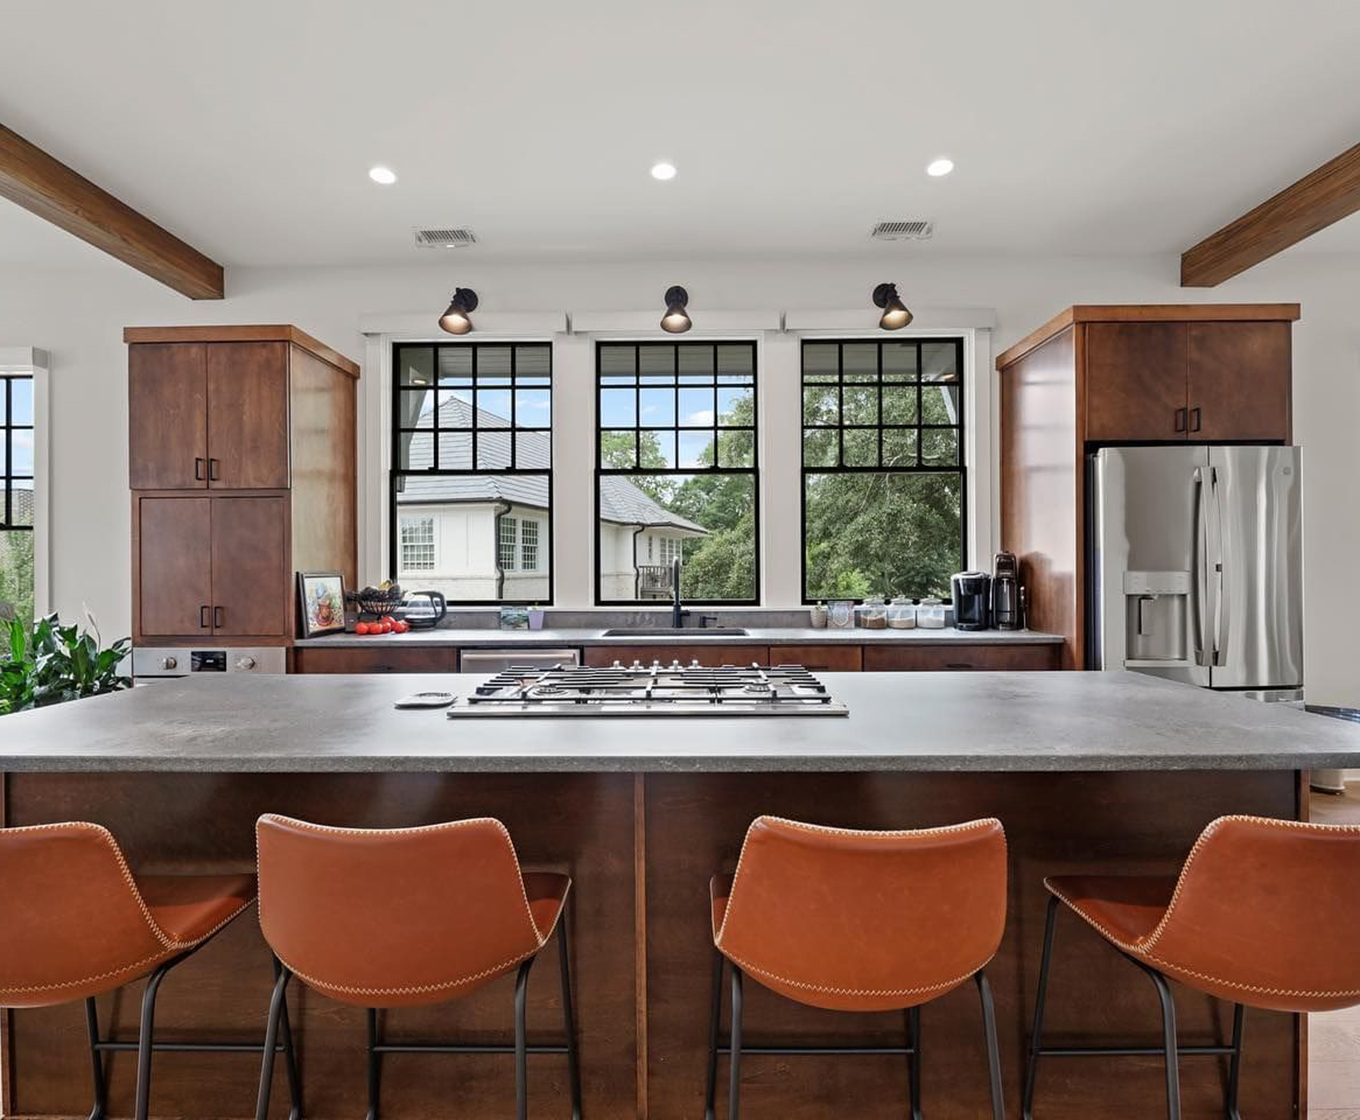 Real estate listing photo showing modern kitchen with large center island and barstools.